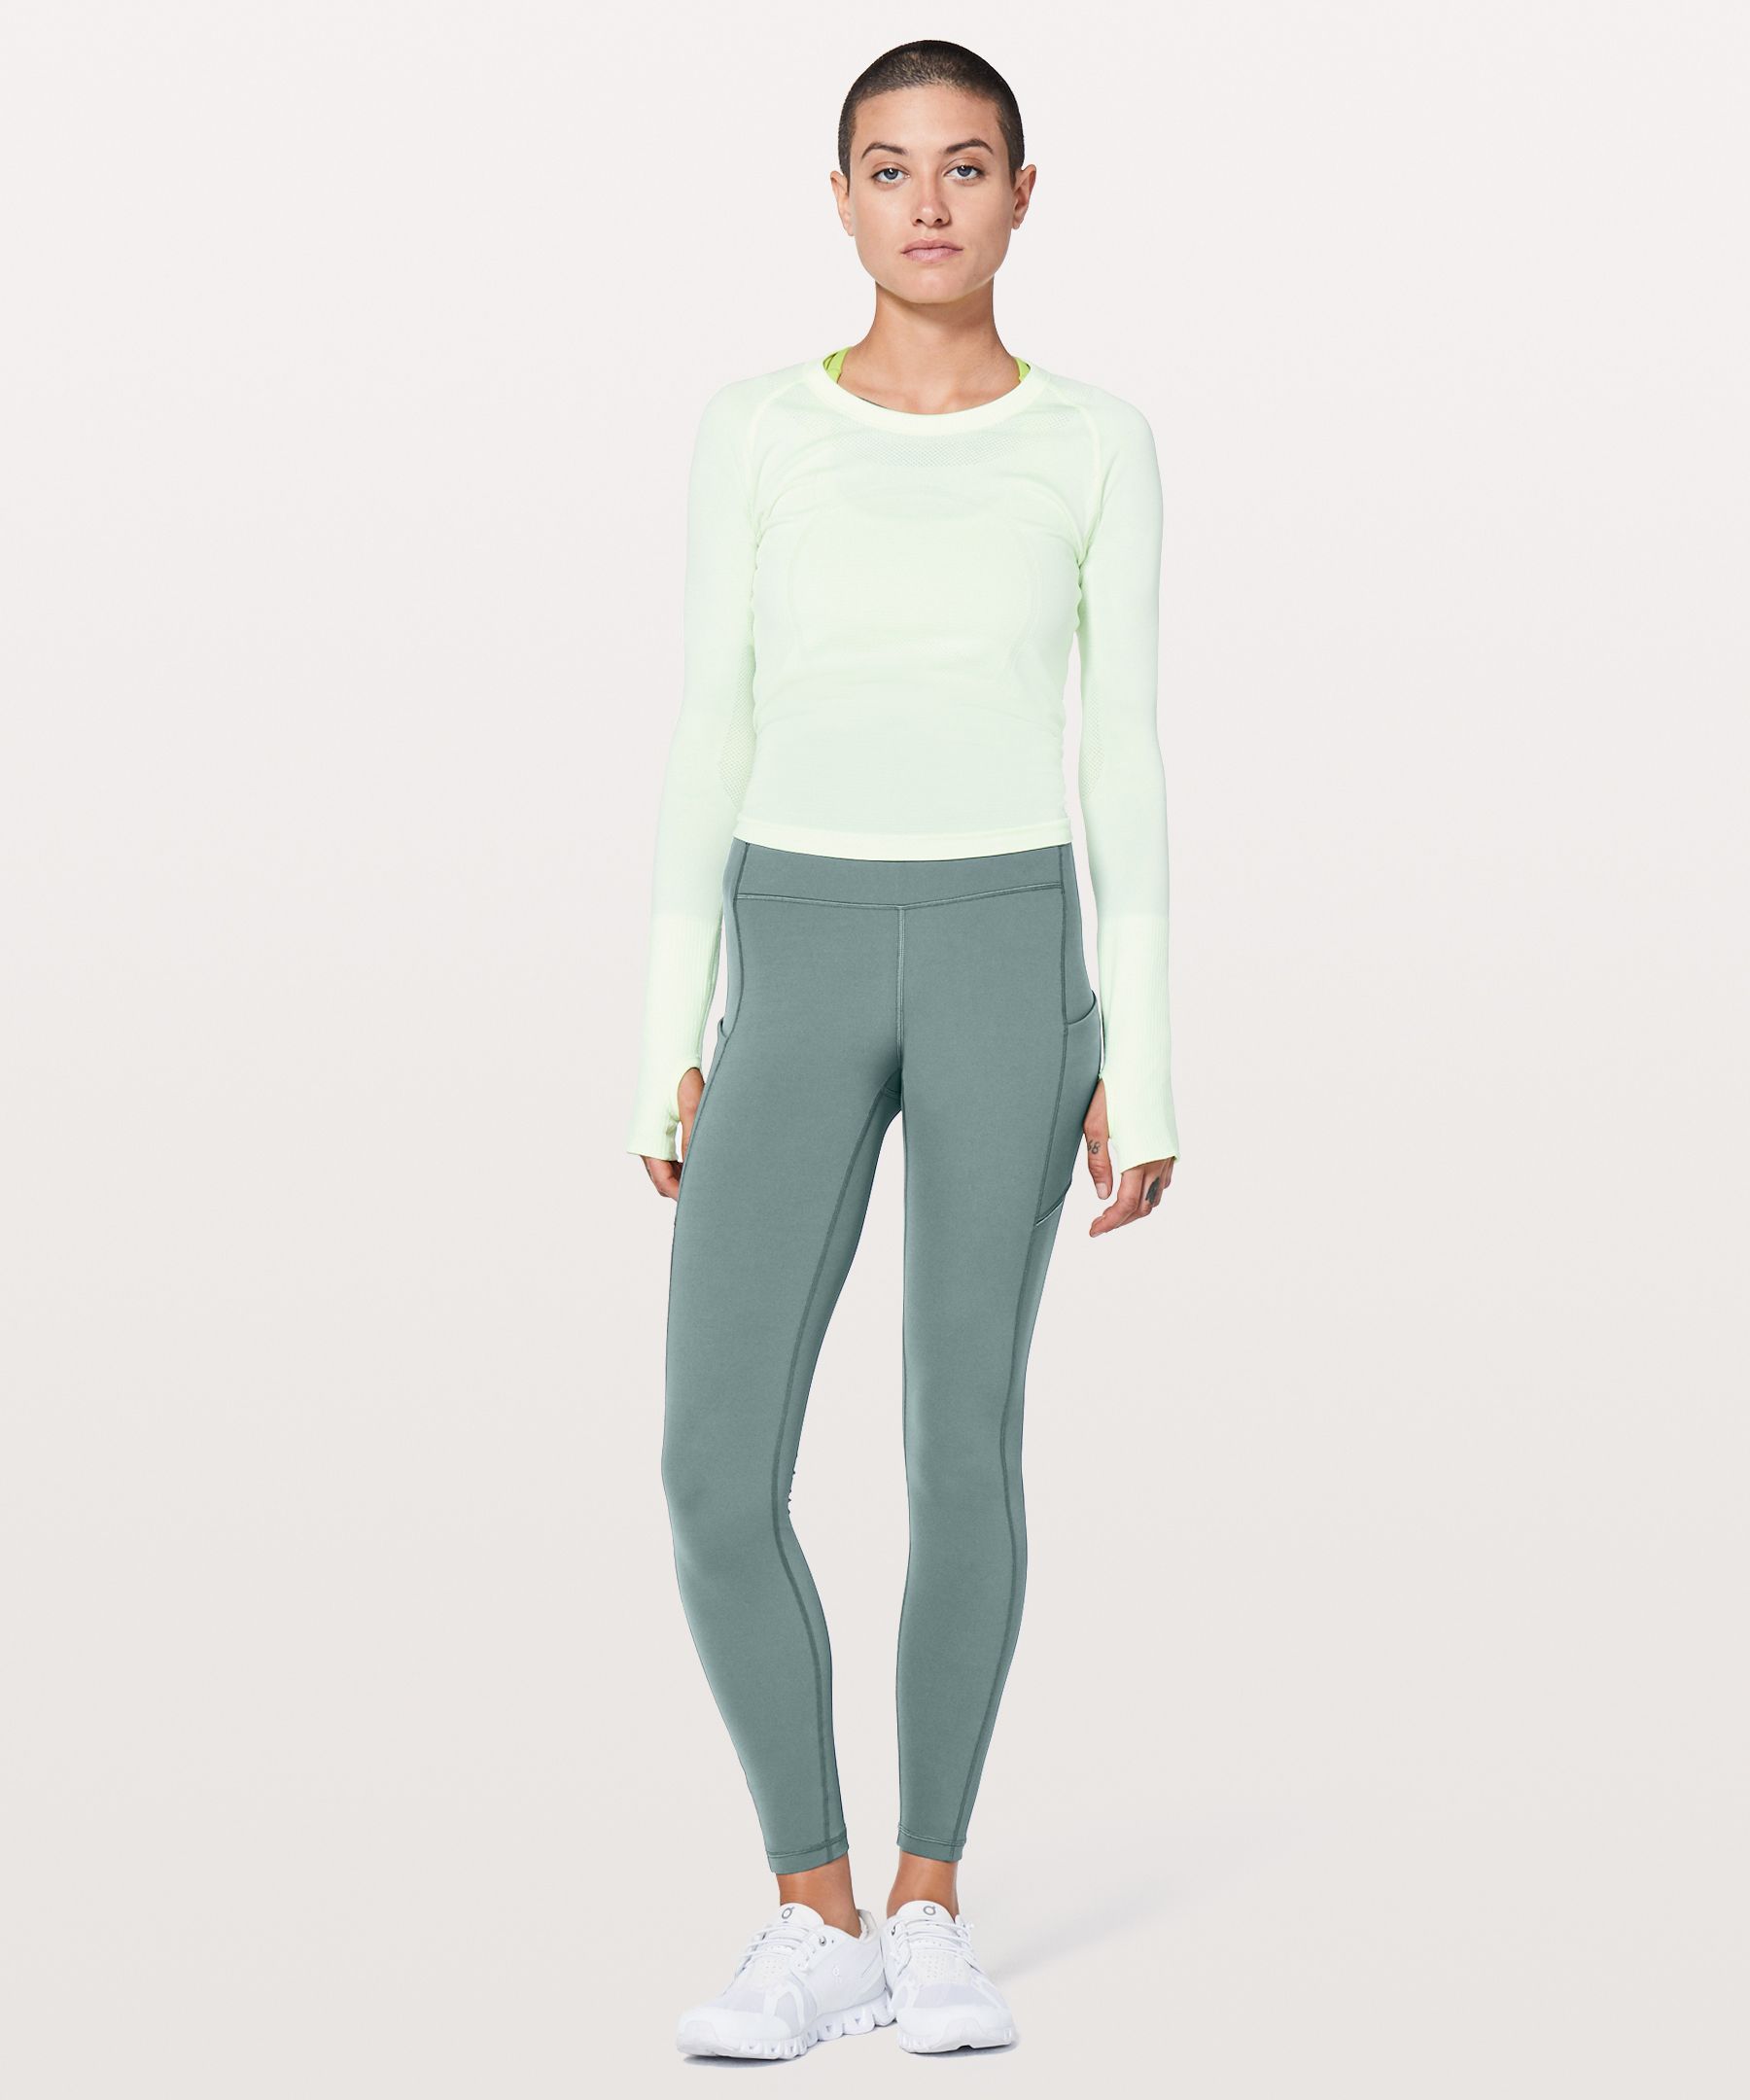 Lululemon Speed Up Tights Black Size 4 - $55 (36% Off Retail) - From Lilith